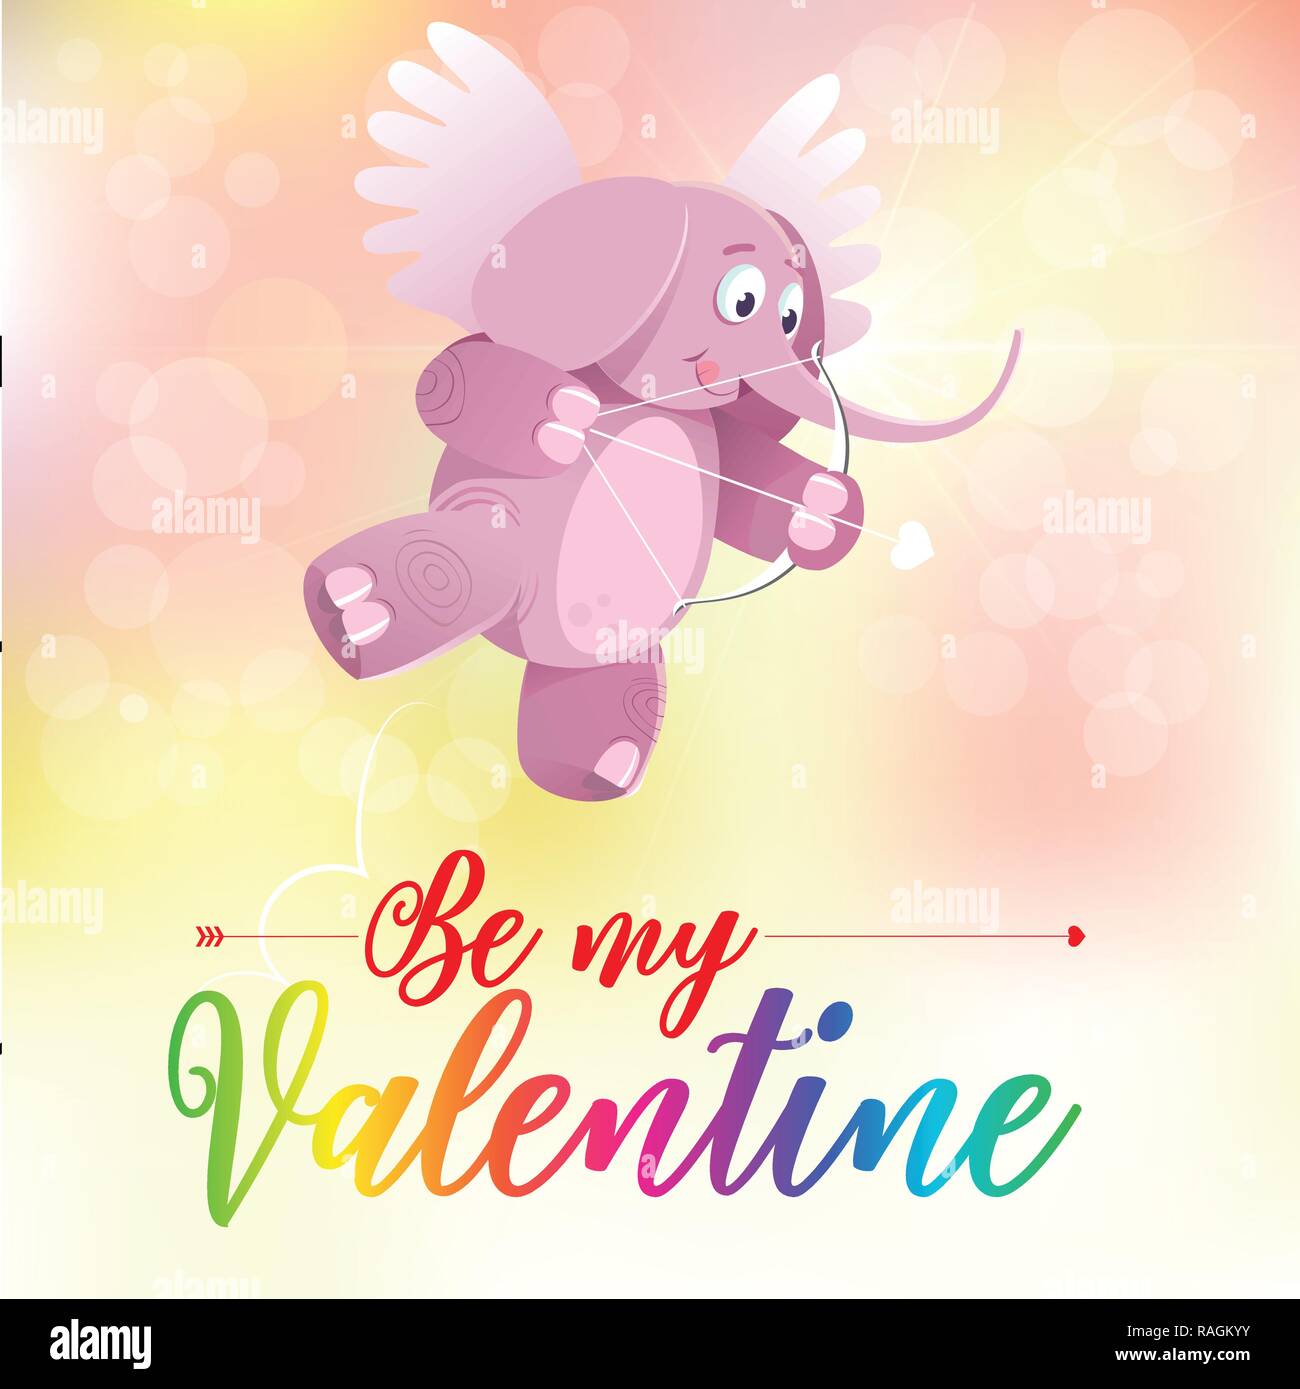 Love greetings from Cupid for St. Valentine's day. Flat design colored illustration. Stock Vector